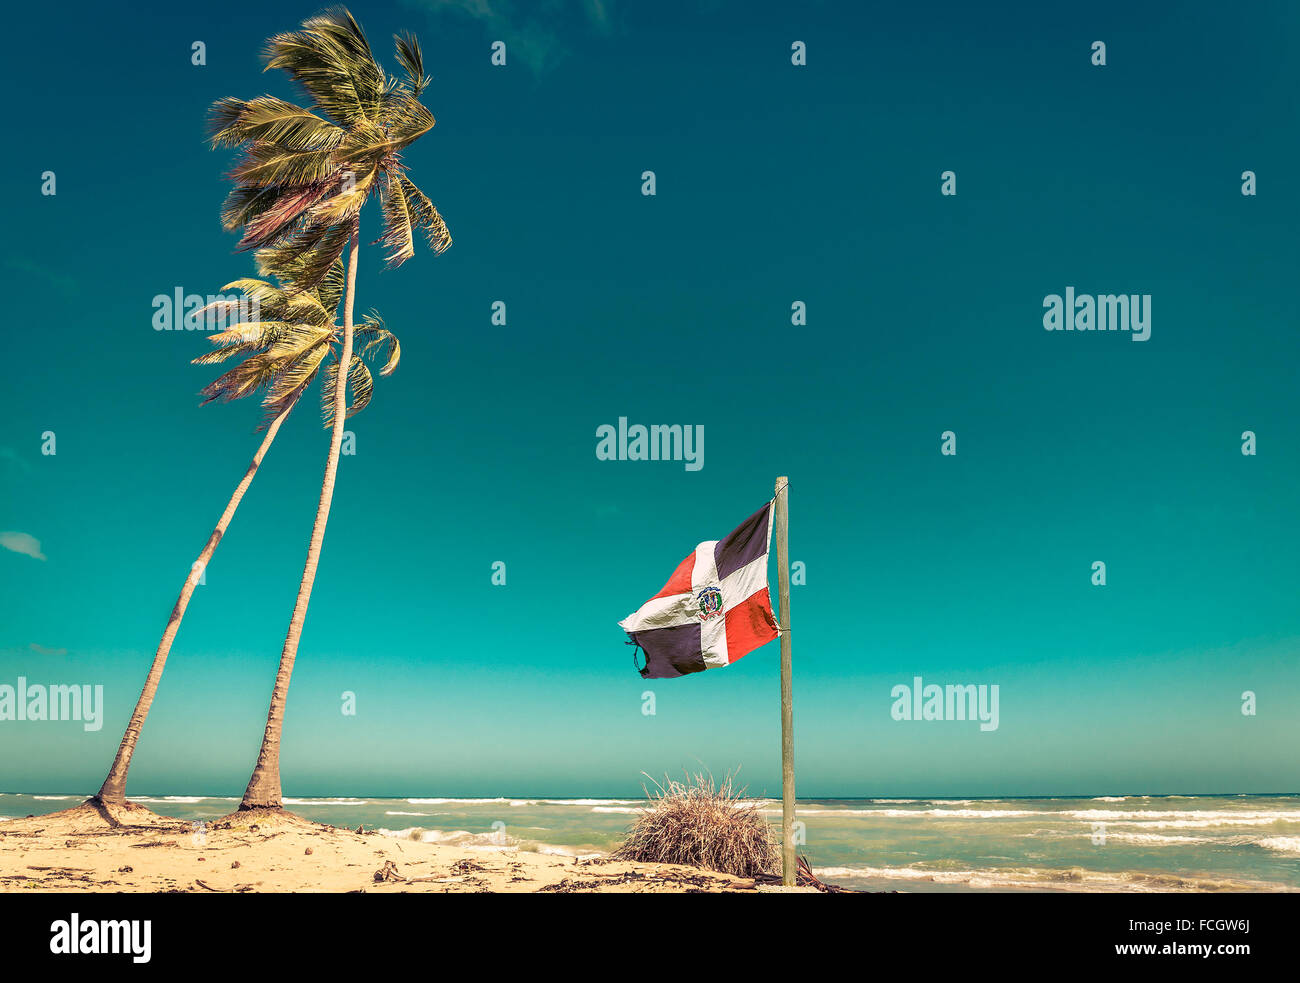 Sandy beach, palm tree and Dominican Republic flag Stock Photo